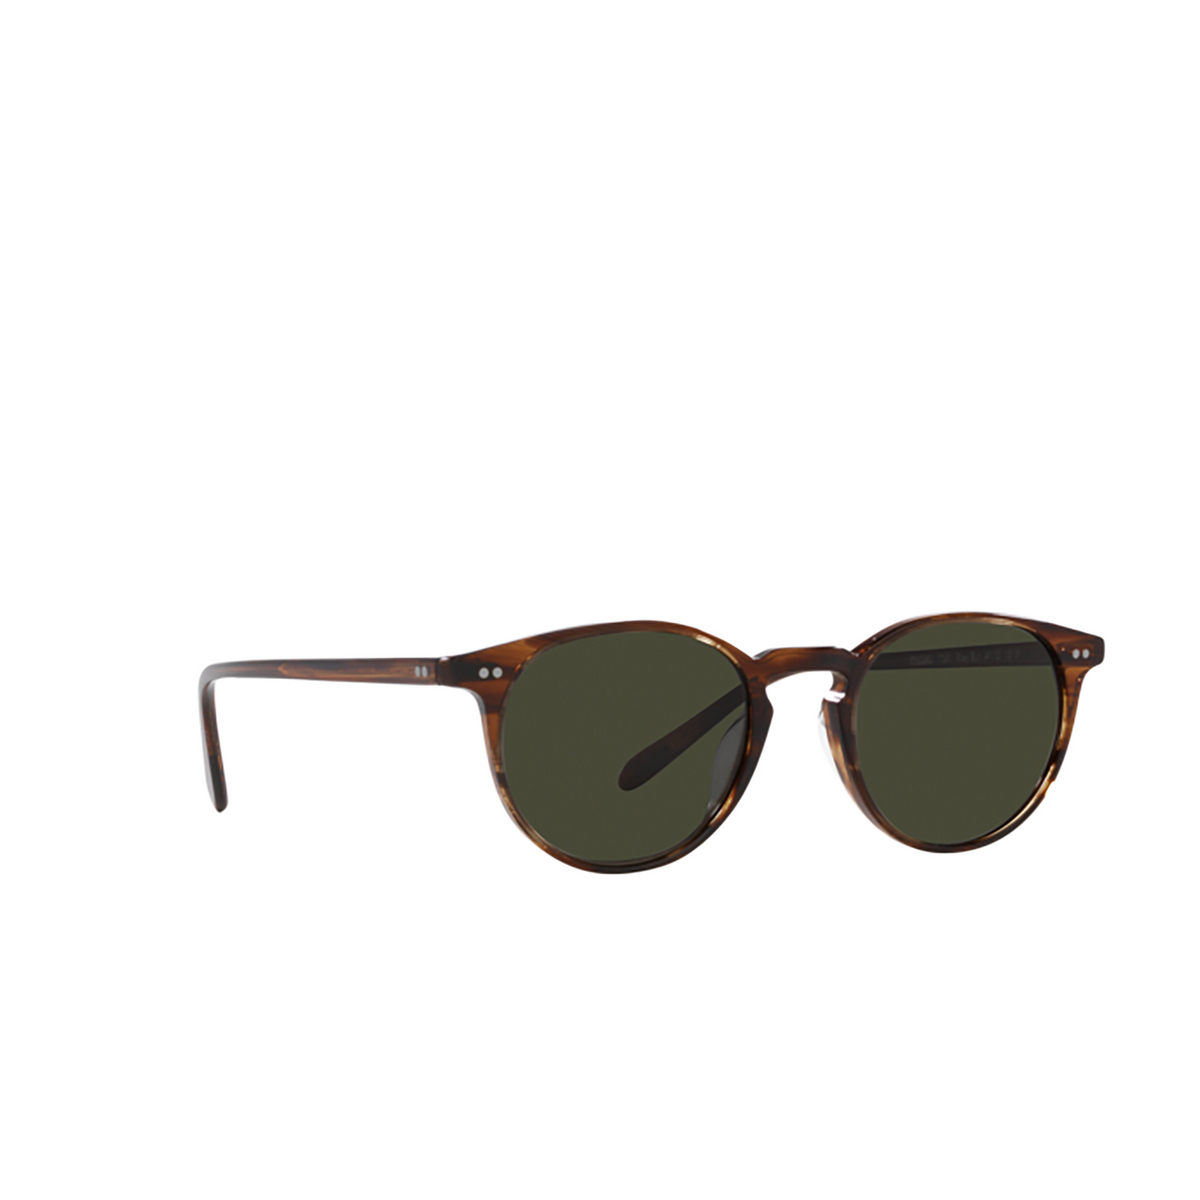 Oliver Peoples RILEY Sunglasses 1724P1 Tuscany Tortoise - three-quarters view